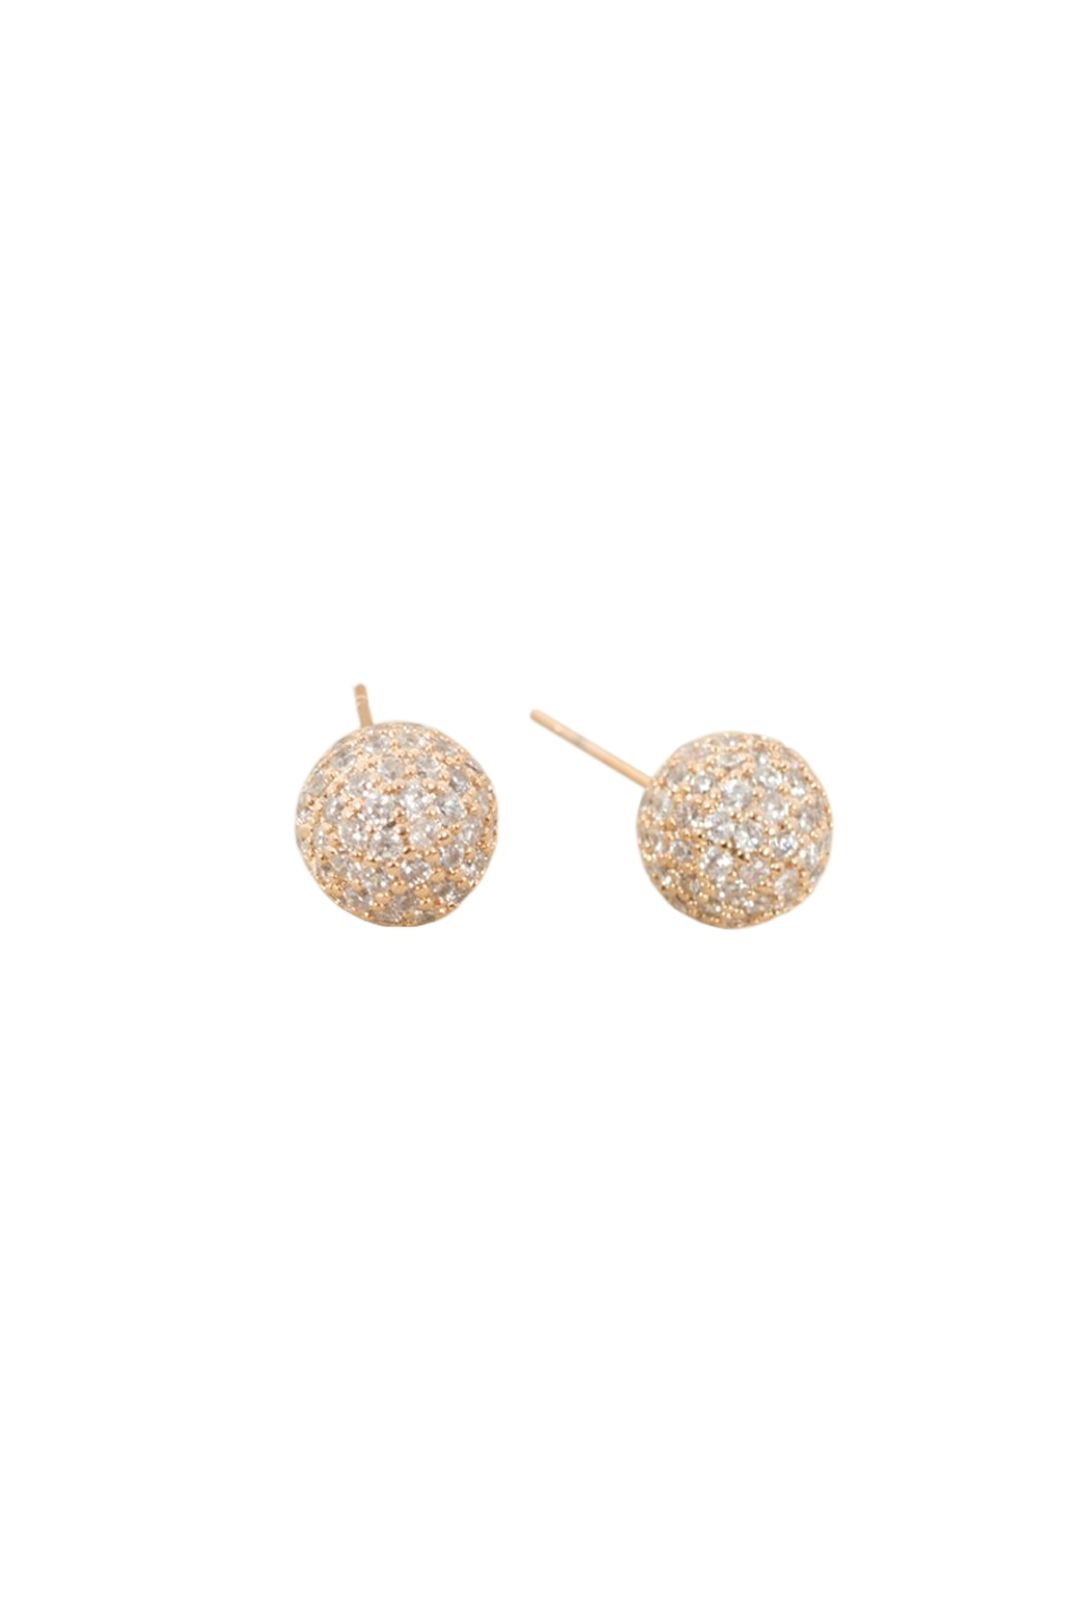 Adorne - Diamante Covered Ball Stud Earring - Gold - Front